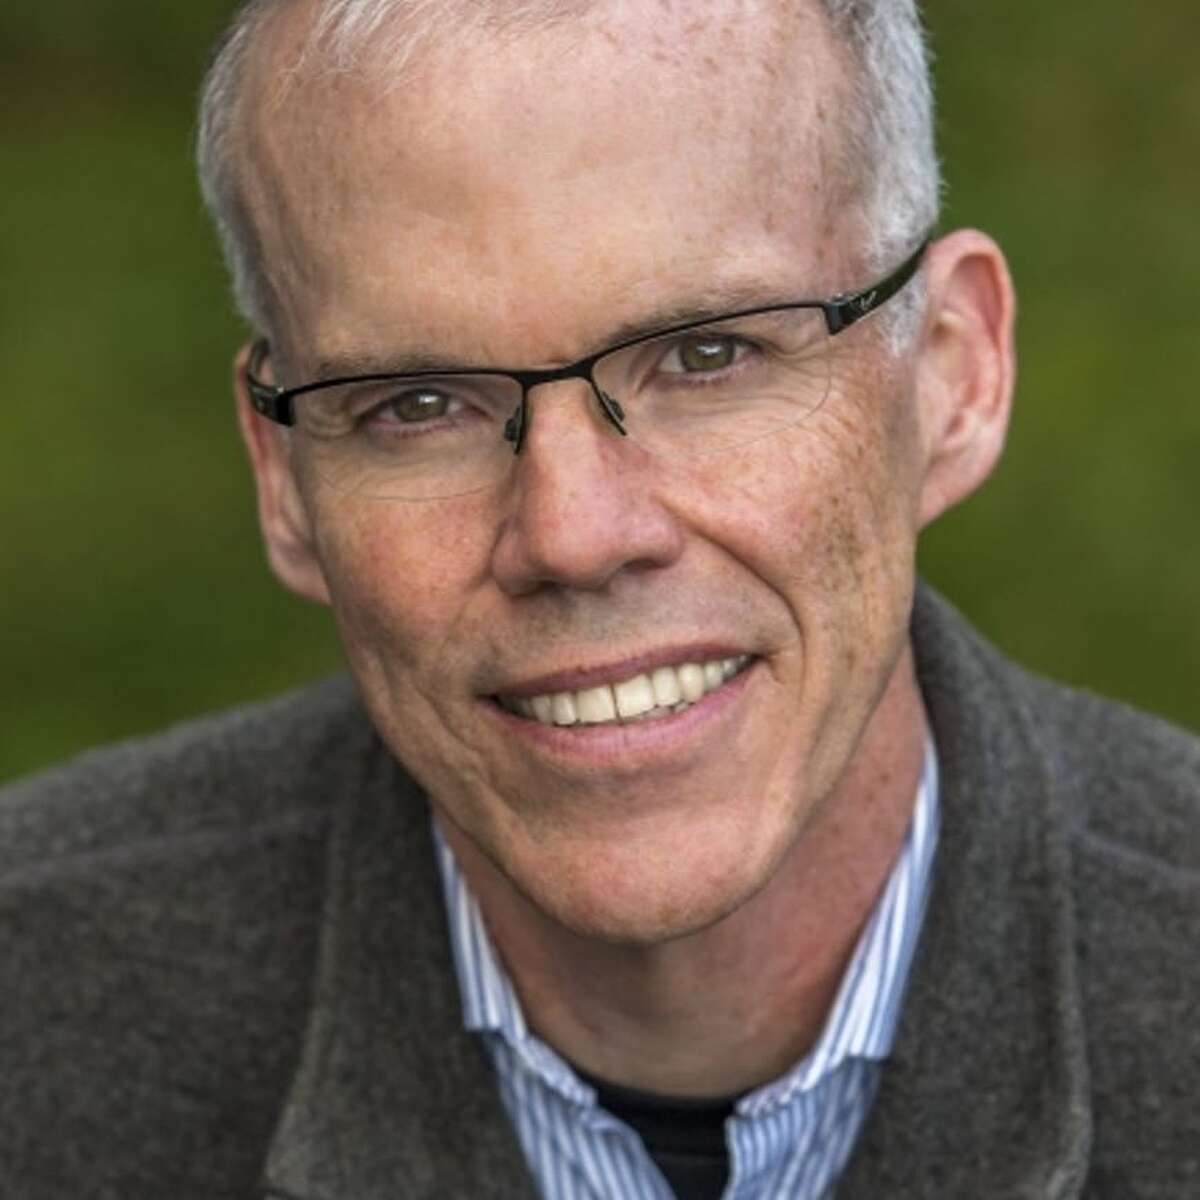 Environmentalist and author Bill McKibben, who lives part-time in the Adirondacks, dives into how the U.S. has evolved in his book, "The Flag, the Cross, and the Station Wagon."